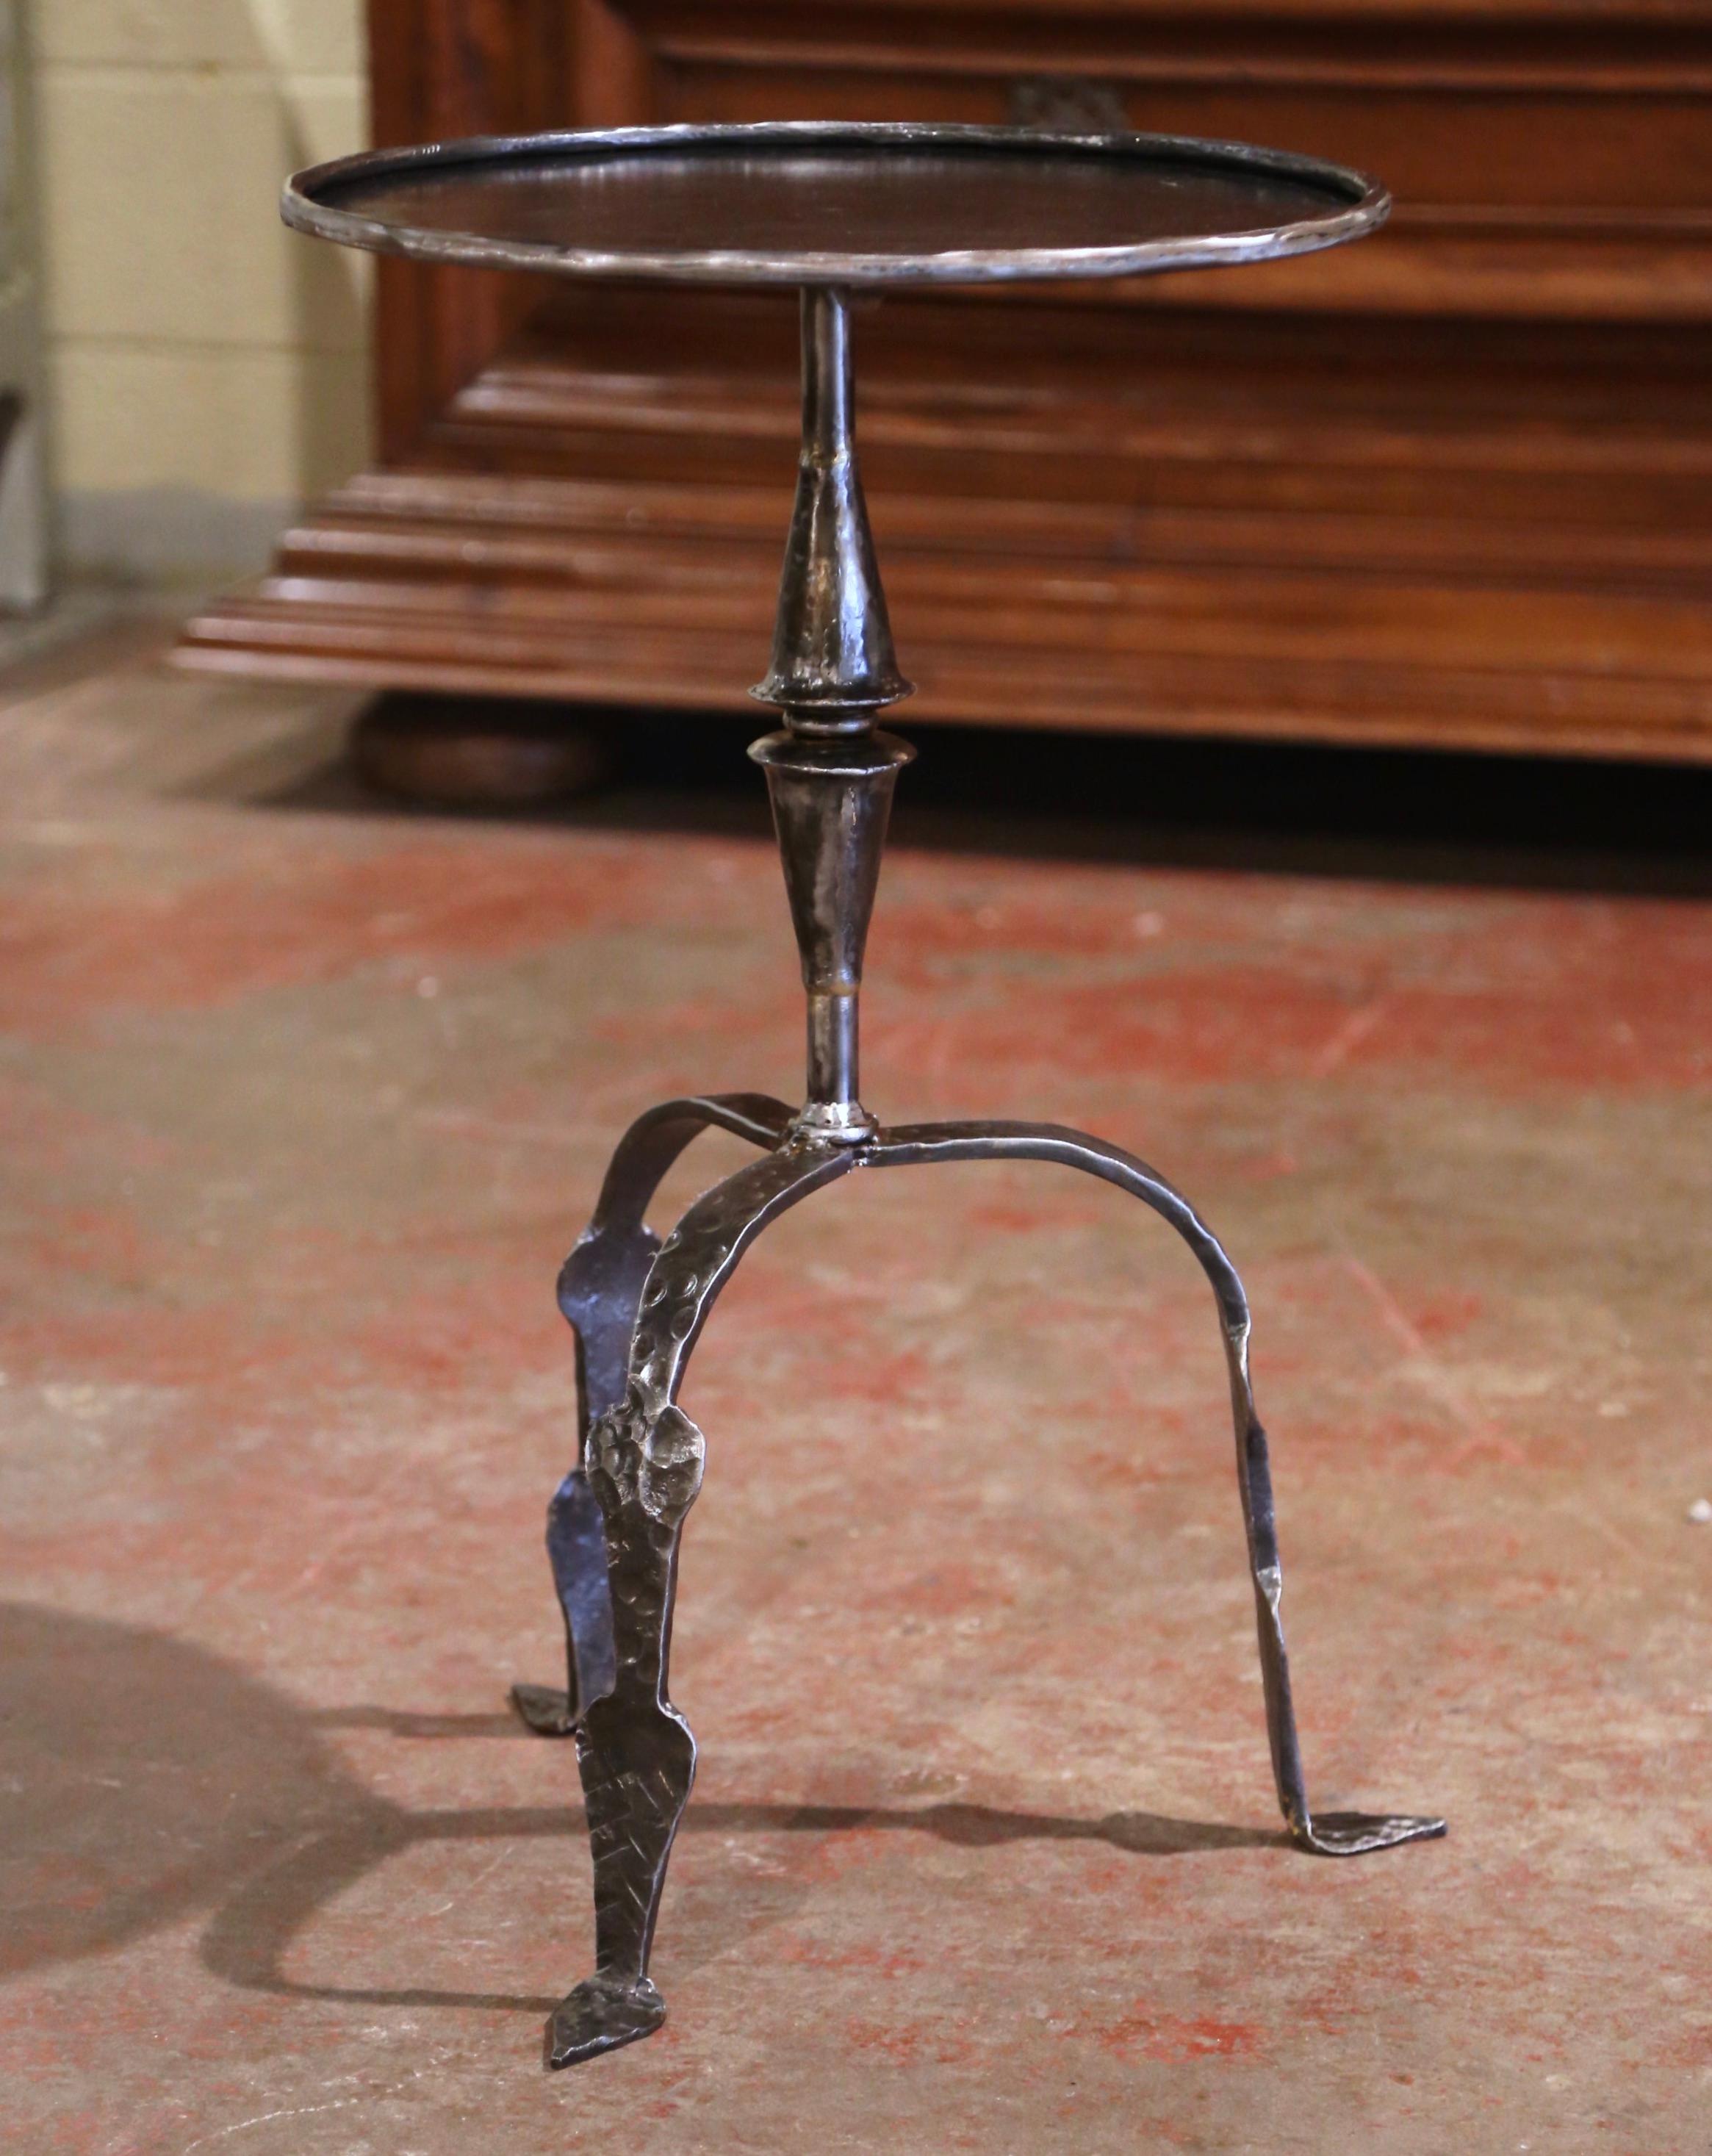 This elegant, antique Gothic pedestal table was crafted in Southern France, circa 1920. The intricate martini table features a forged central pedestal stem embellished with turned decor over three scrolled legs ending with flat feet. The serving